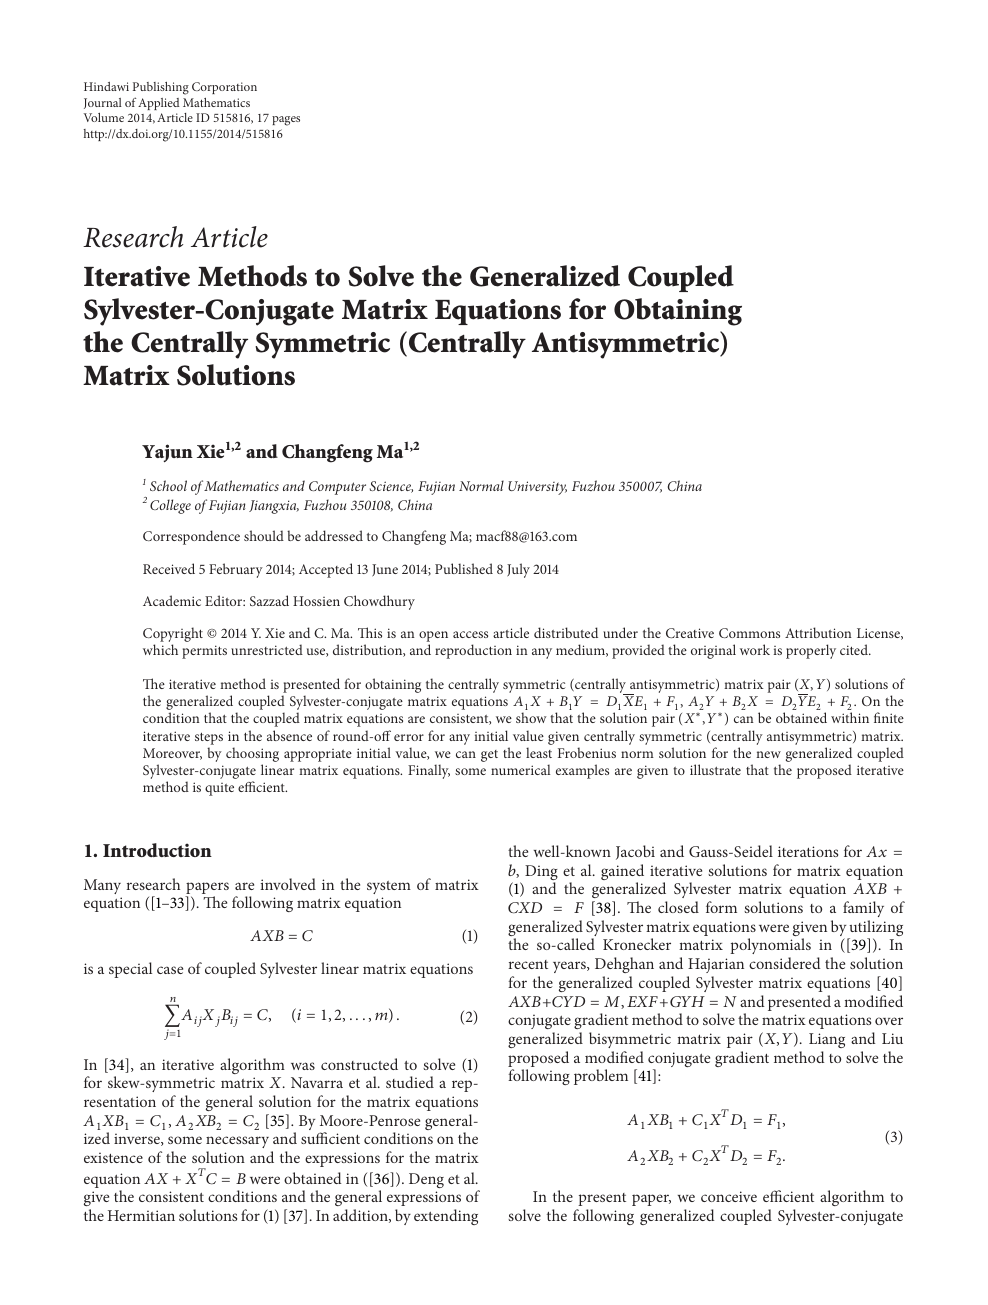 Iterative Methods To Solve The Generalized Coupled Sylvester Conjugate Matrix Equations For Obtaining The Centrally Symmetric Centrally Antisymmetric Matrix Solutions Topic Of Research Paper In Mathematics Download Scholarly Article Pdf And Read